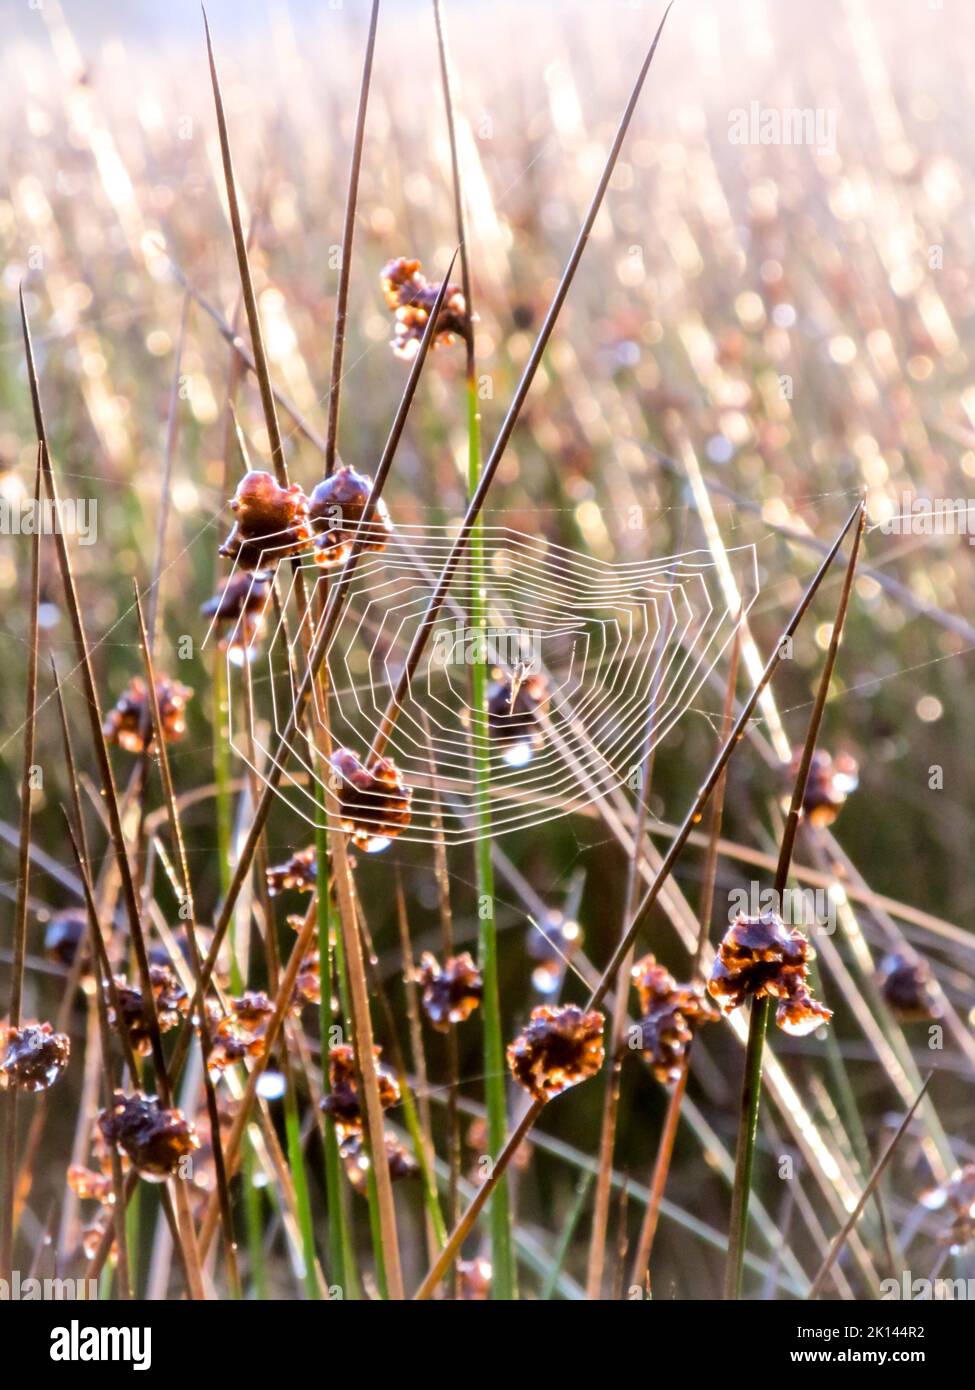 A delicate spider web catching the early morning sunlight. Stock Photo